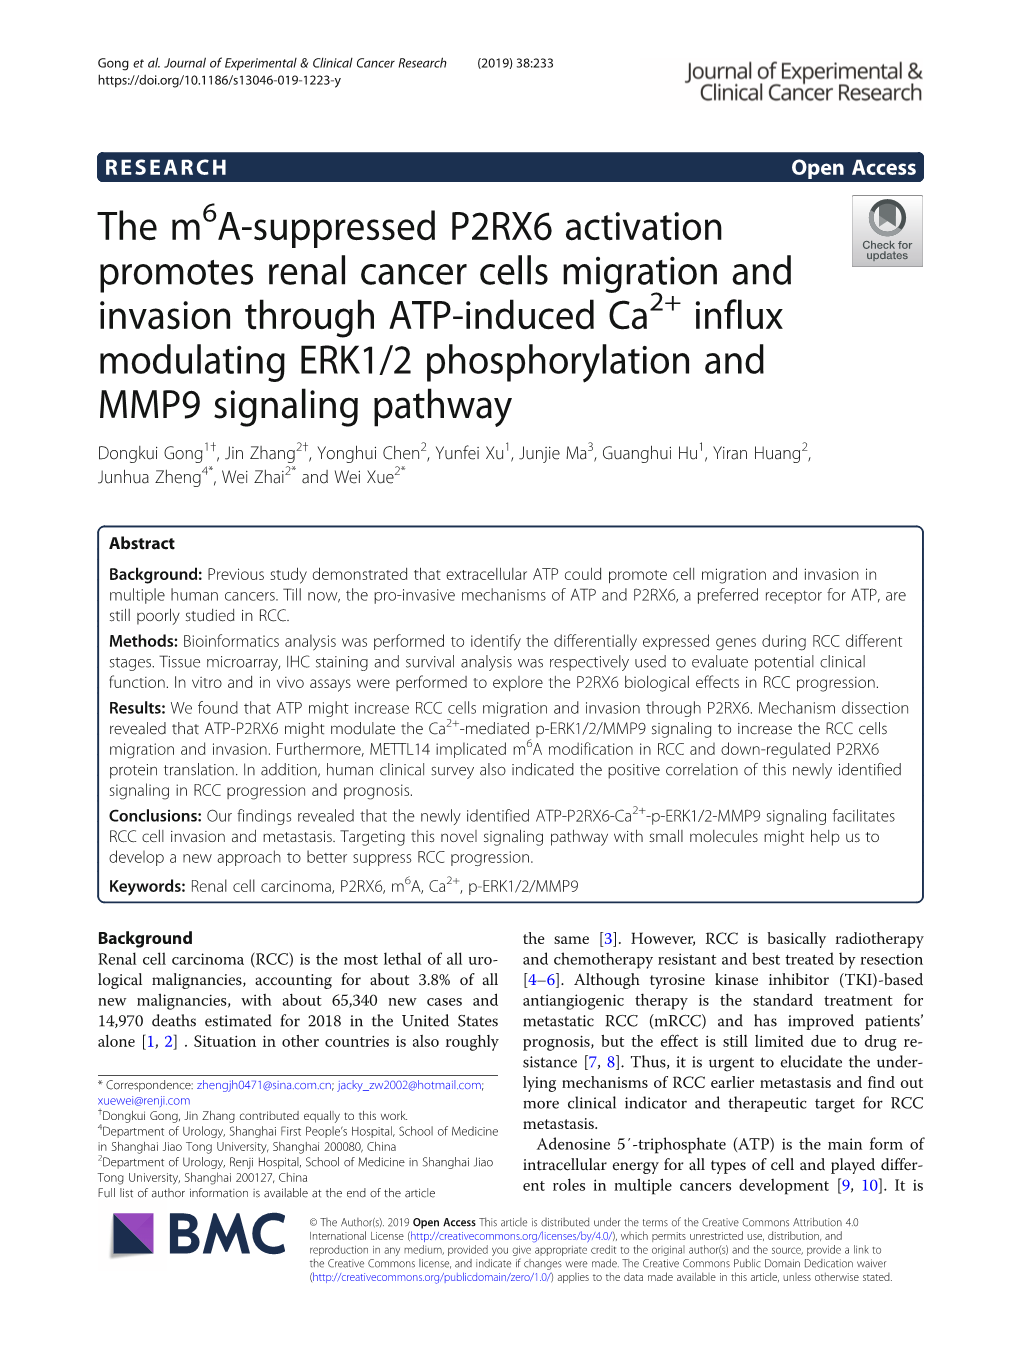 The M6a-Suppressed P2RX6 Activation Promotes Renal Cancer